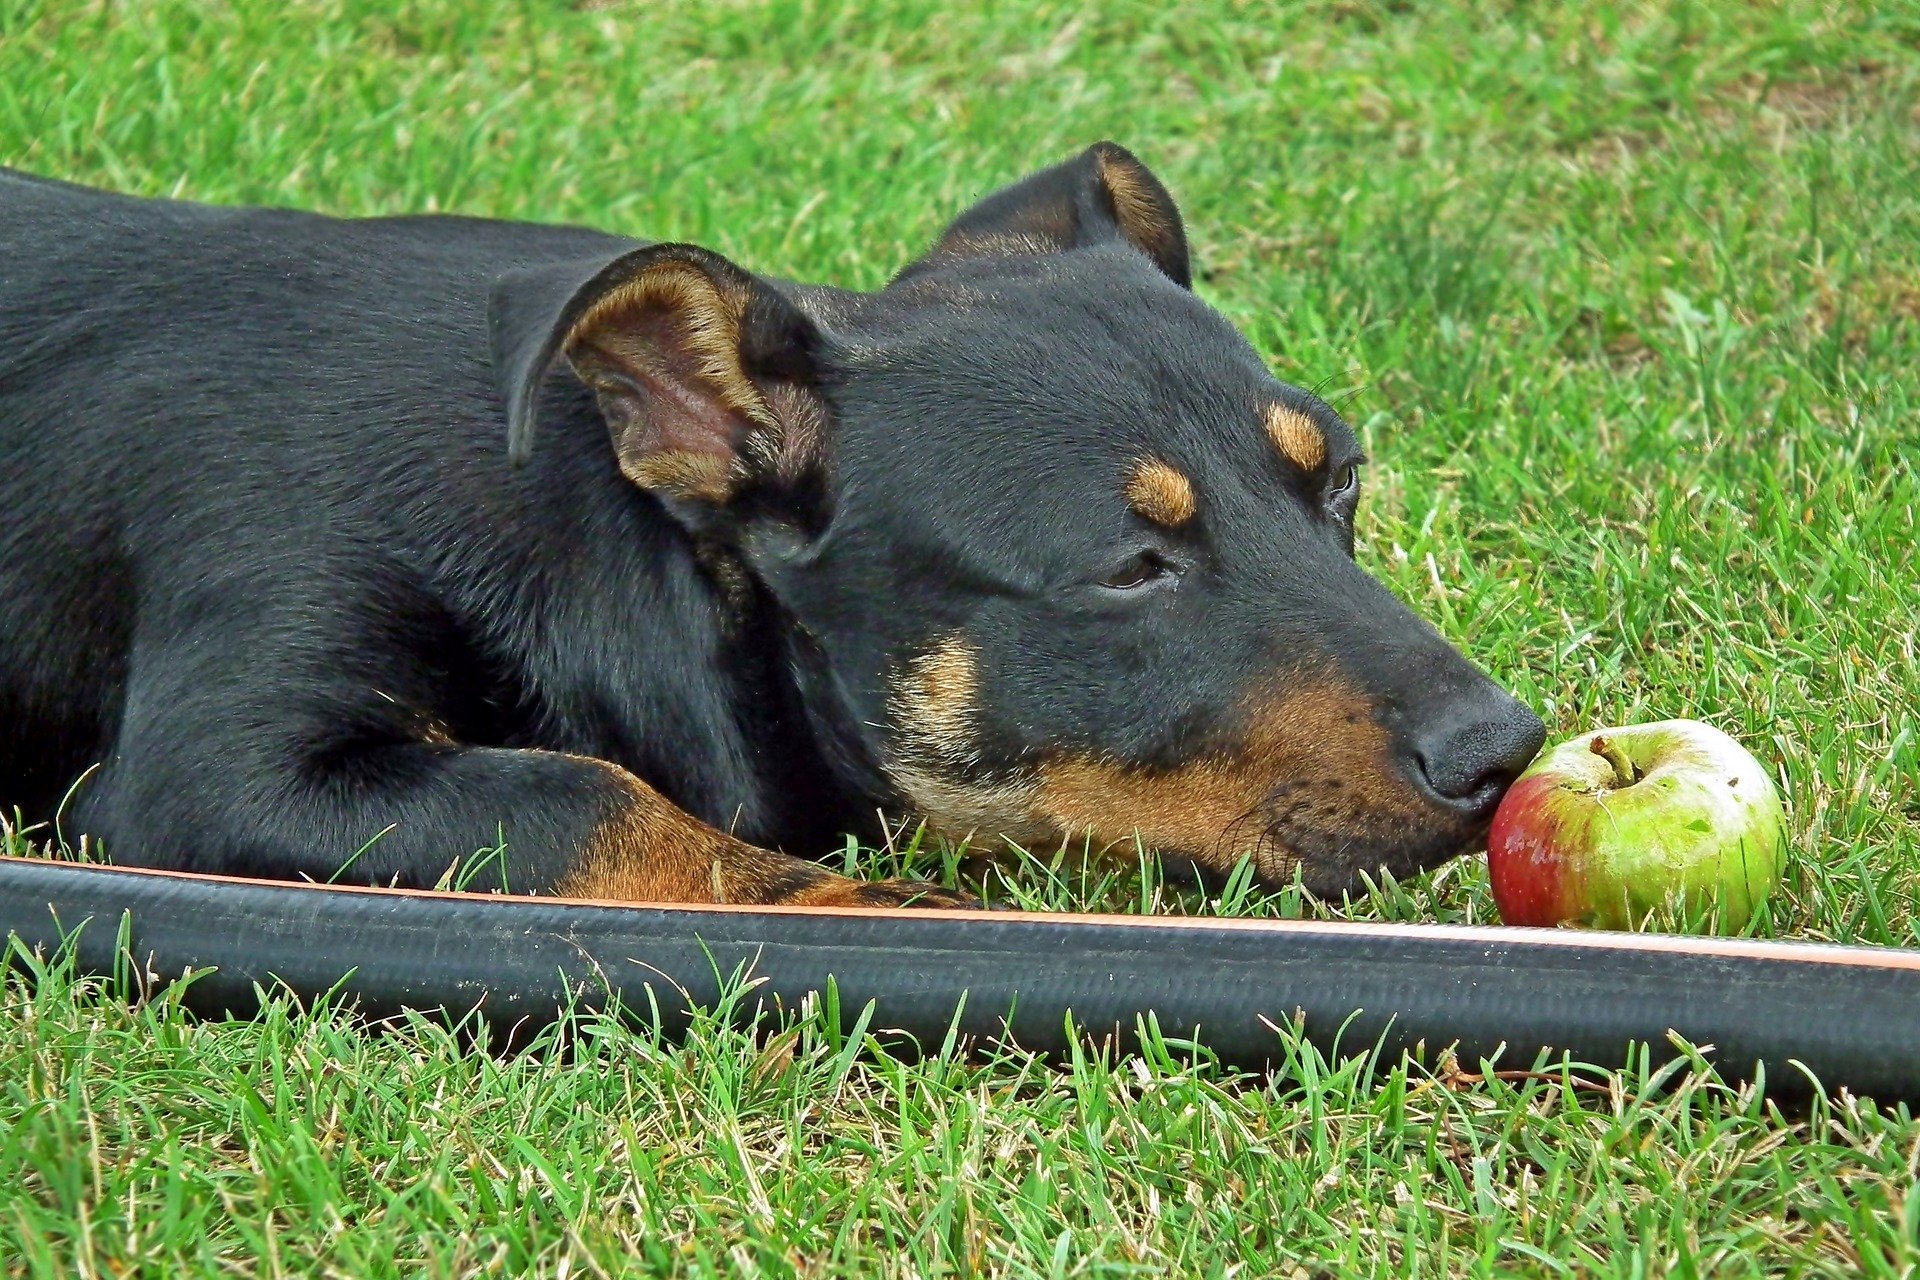 can apples harm dogs